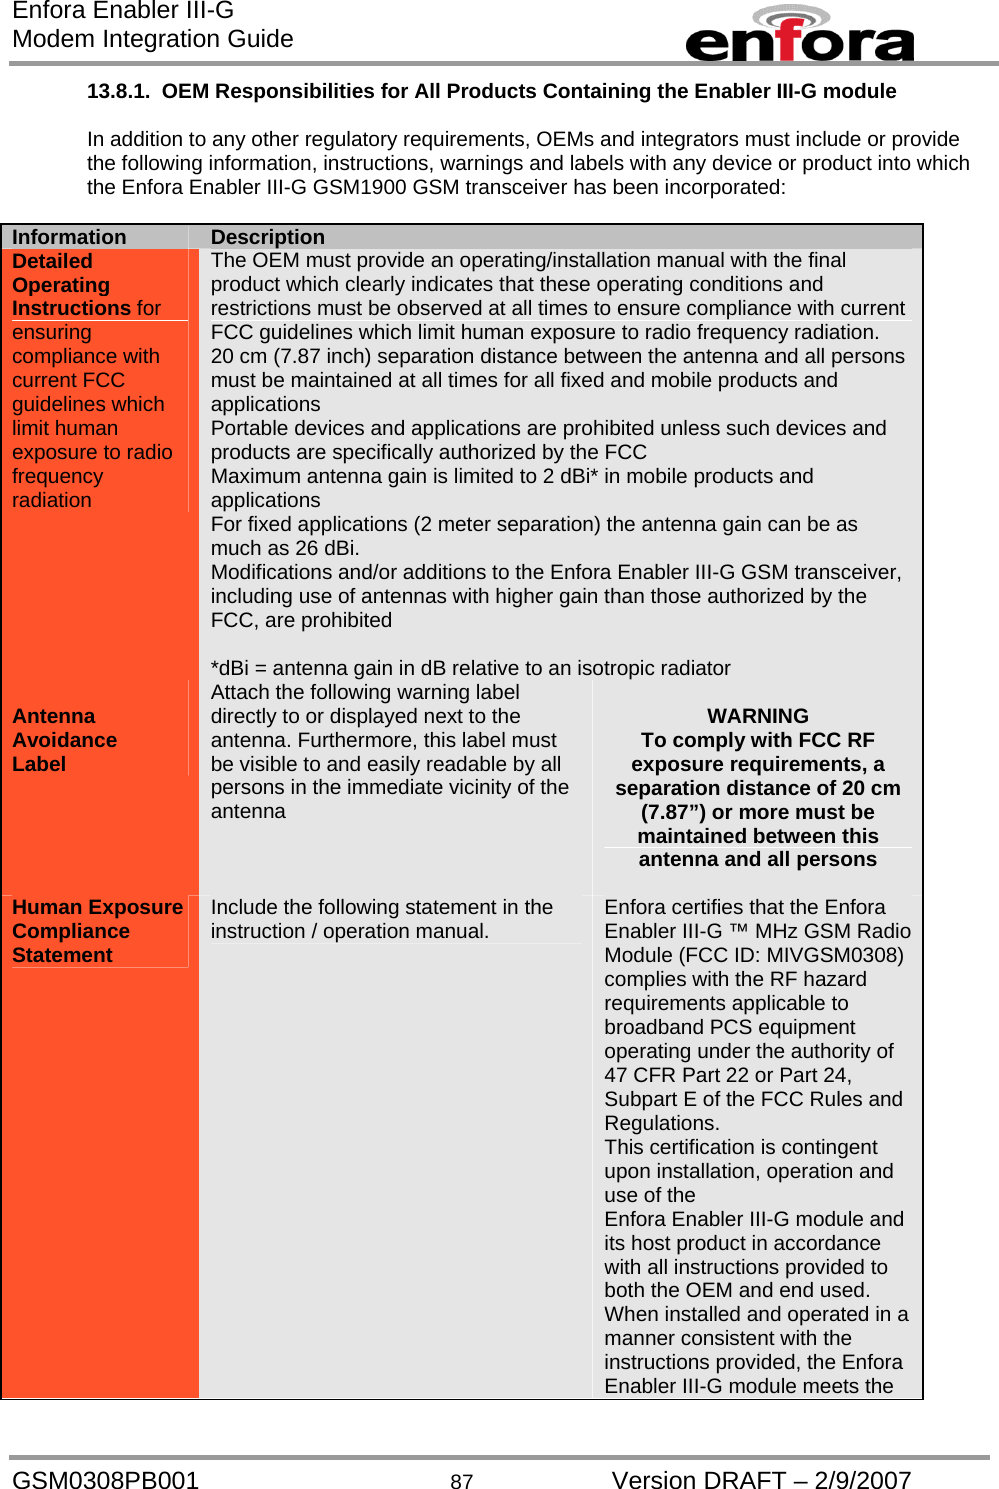 Enfora Enabler III-G Modem Integration Guide 13.8.1.  OEM Responsibilities for All Products Containing the Enabler III-G module  In addition to any other regulatory requirements, OEMs and integrators must include or provide the following information, instructions, warnings and labels with any device or product into which the Enfora Enabler III-G GSM1900 GSM transceiver has been incorporated:  Information  Description Detailed Operating Instructions for ensuring compliance with current FCC guidelines which limit human exposure to radio frequency radiation The OEM must provide an operating/installation manual with the final product which clearly indicates that these operating conditions and restrictions must be observed at all times to ensure compliance with current FCC guidelines which limit human exposure to radio frequency radiation. 20 cm (7.87 inch) separation distance between the antenna and all persons must be maintained at all times for all fixed and mobile products and applications Portable devices and applications are prohibited unless such devices and products are specifically authorized by the FCC Maximum antenna gain is limited to 2 dBi* in mobile products and applications For fixed applications (2 meter separation) the antenna gain can be as much as 26 dBi. Modifications and/or additions to the Enfora Enabler III-G GSM transceiver, including use of antennas with higher gain than those authorized by the FCC, are prohibited  *dBi = antenna gain in dB relative to an isotropic radiator  Antenna Avoidance Label Attach the following warning label directly to or displayed next to the antenna. Furthermore, this label must be visible to and easily readable by all persons in the immediate vicinity of the antenna  WARNING To comply with FCC RF exposure requirements, a separation distance of 20 cm (7.87”) or more must be maintained between this antenna and all persons  Human Exposure Compliance Statement Include the following statement in the instruction / operation manual.  Enfora certifies that the Enfora Enabler III-G ™ MHz GSM Radio Module (FCC ID: MIVGSM0308) complies with the RF hazard requirements applicable to broadband PCS equipment operating under the authority of 47 CFR Part 22 or Part 24, Subpart E of the FCC Rules and Regulations. This certification is contingent upon installation, operation and use of the Enfora Enabler III-G module and its host product in accordance with all instructions provided to both the OEM and end used.  When installed and operated in a manner consistent with the instructions provided, the Enfora Enabler III-G module meets the GSM0308PB001  87  Version DRAFT – 2/9/2007 